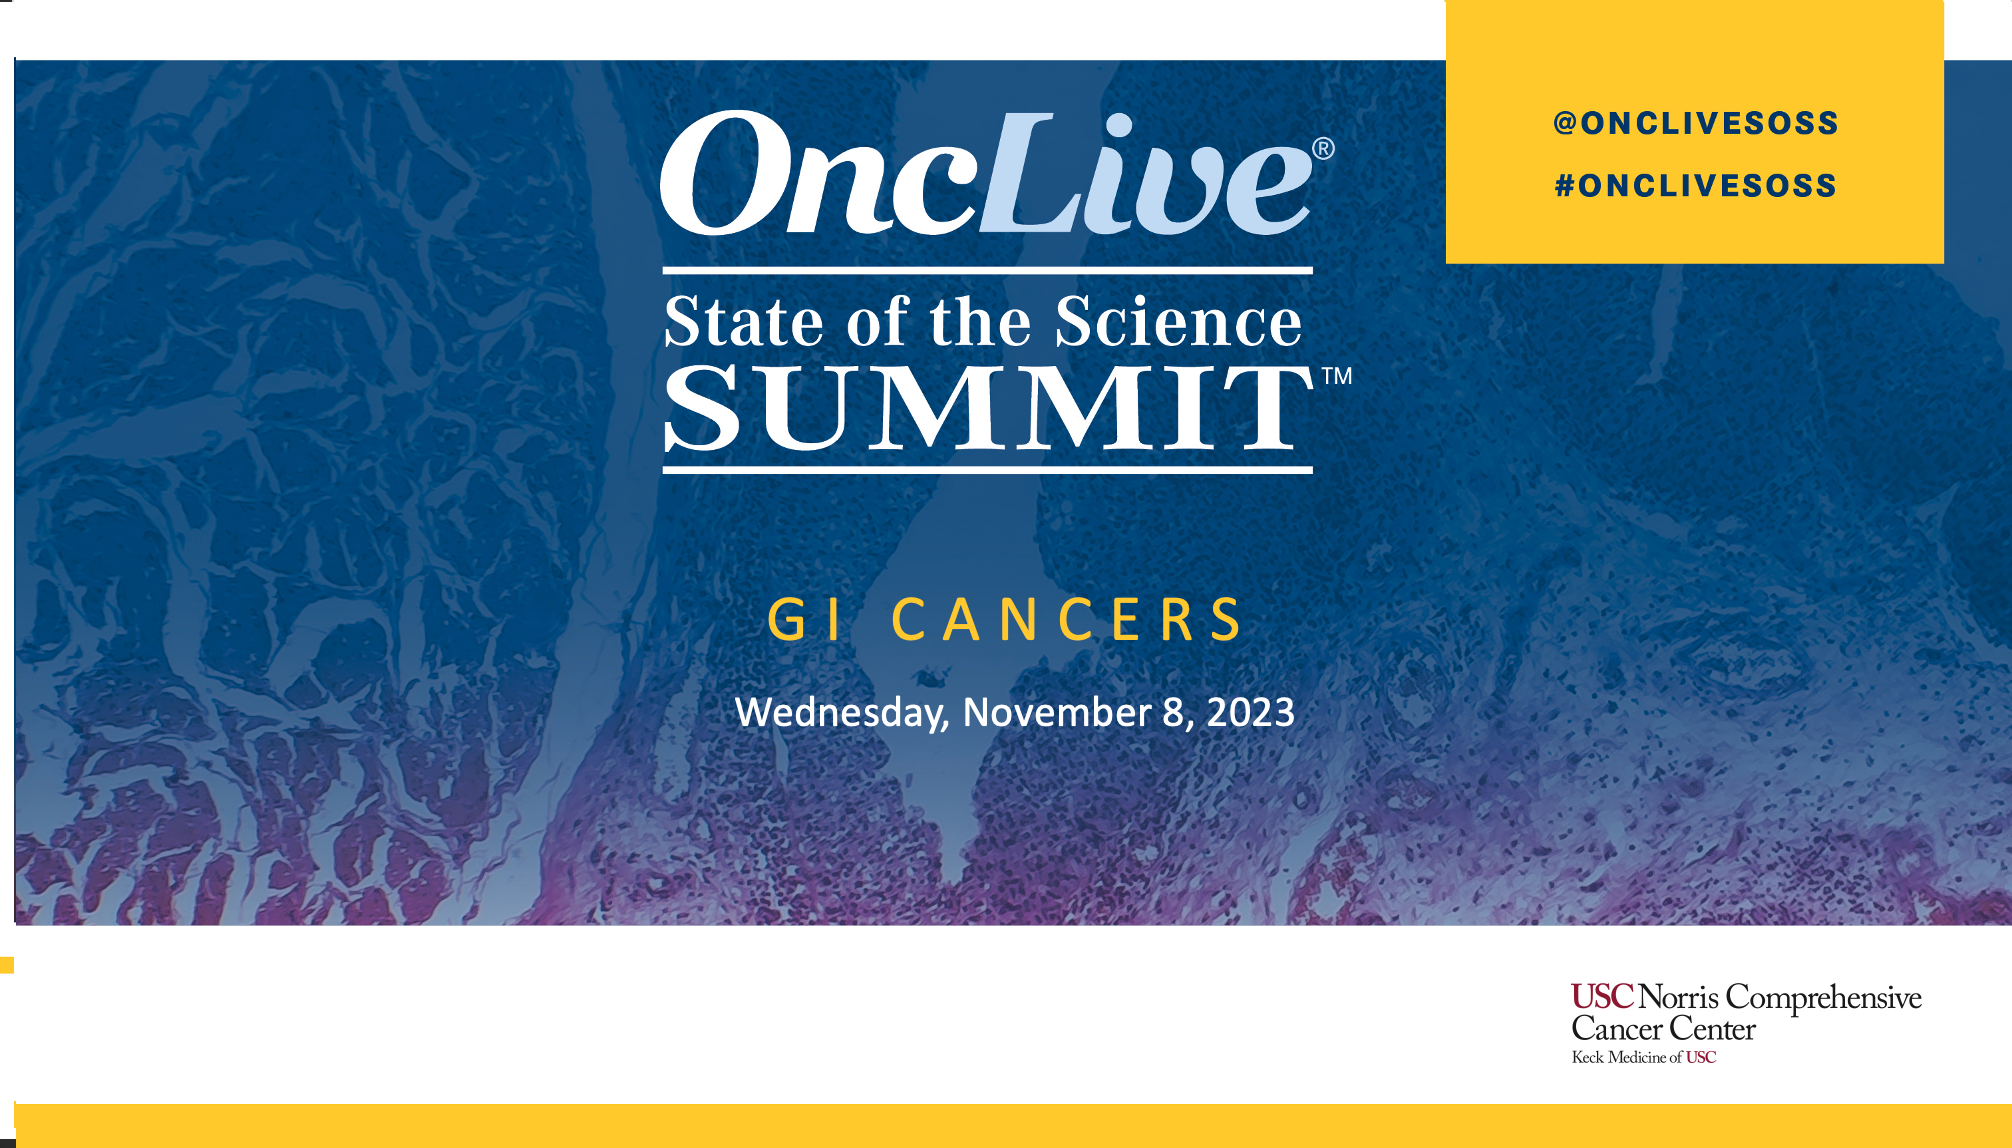 State of the Science Summit - Gastrointestinal Cancers: Chaired by Syma Iqbal, MD, and Anthony El-Khoueiry, MD